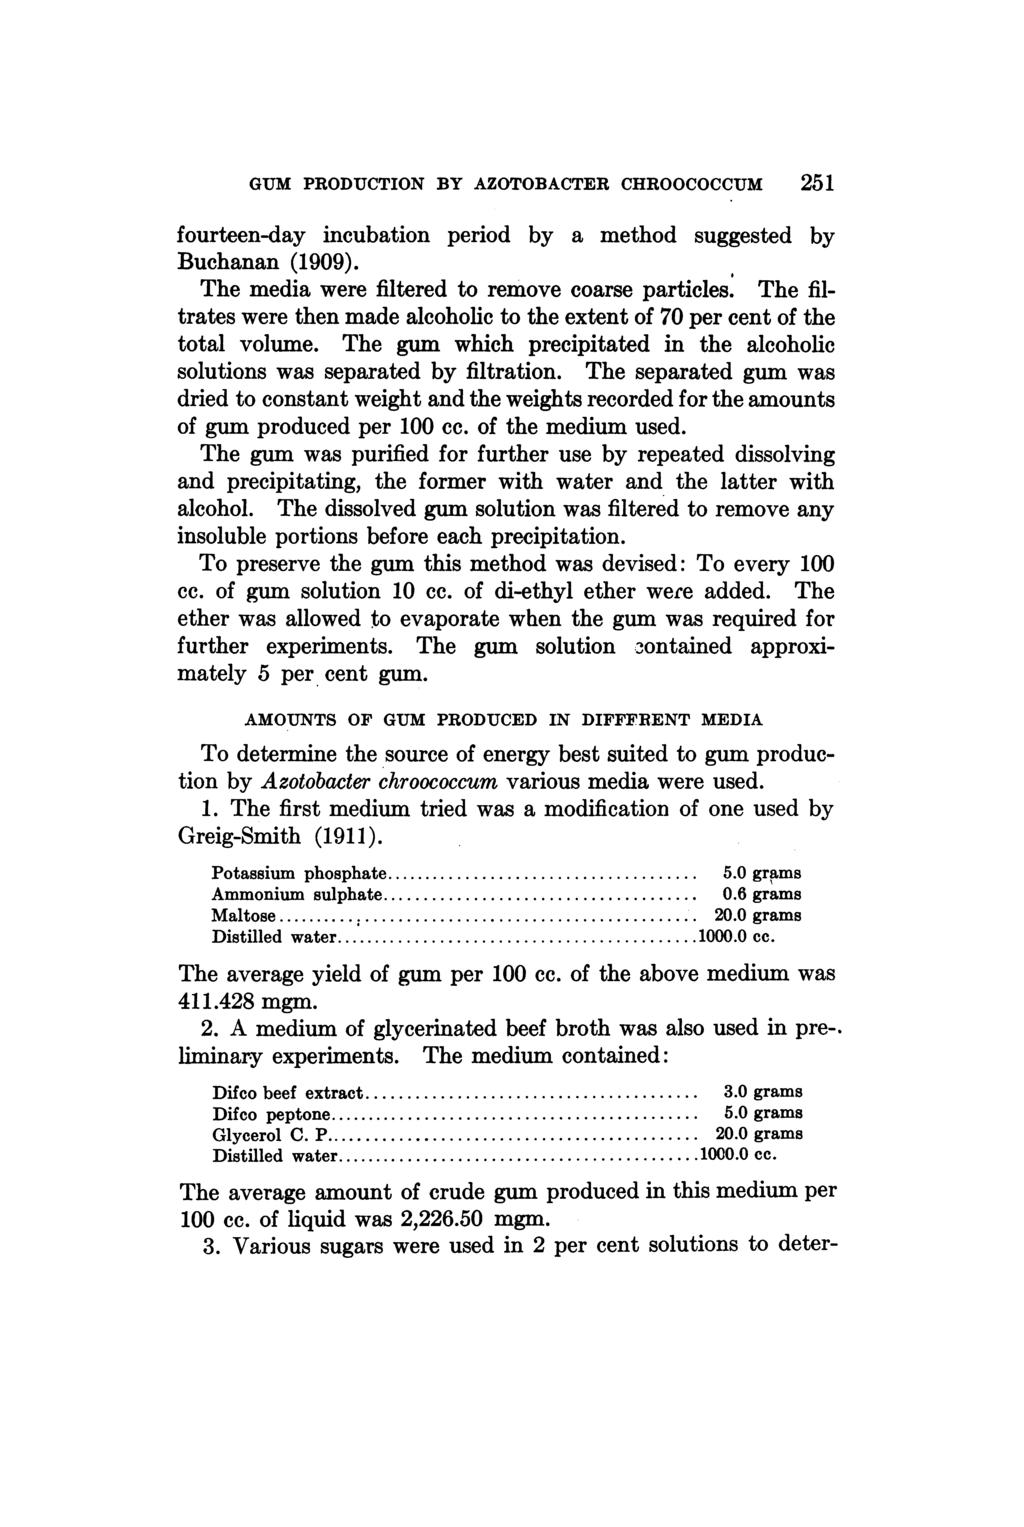 GUM PRODUCTION BY AZOTOBACTER CHROOCOCCUM 251 fourteen-day incubation period by a method suggested by Buchanan (1909). The media were filtered to remove coarse particles.